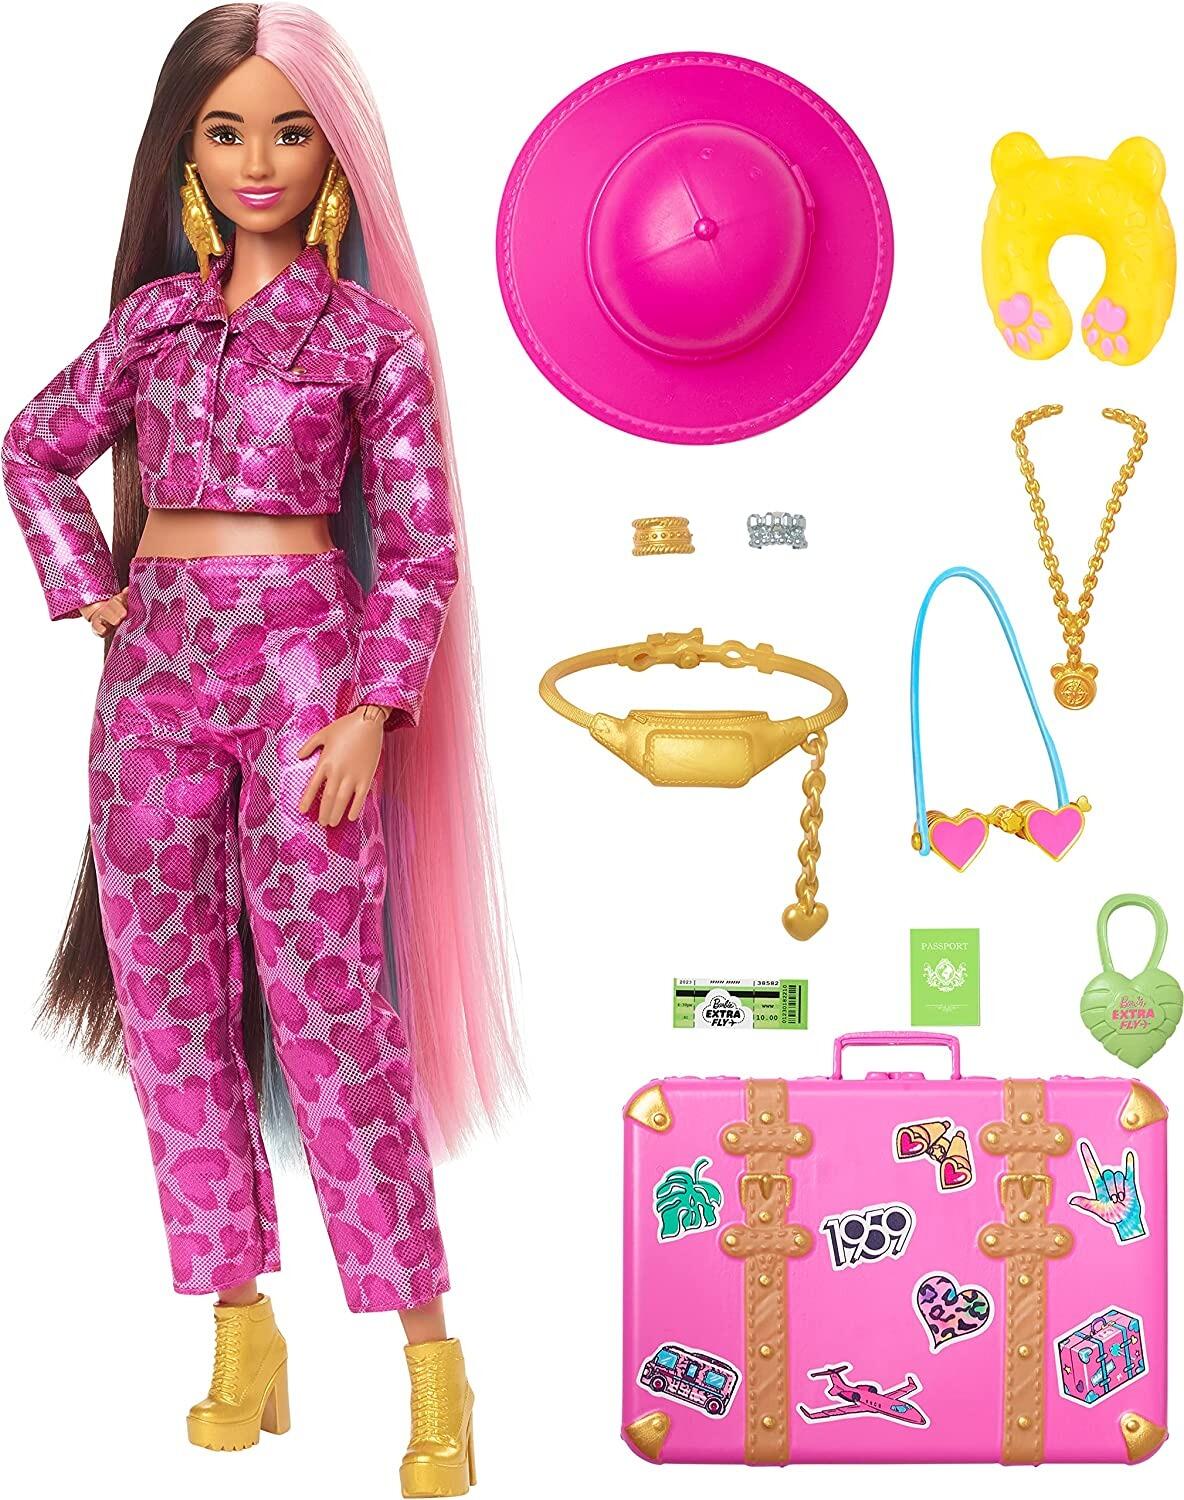 Barbie Extra Fly, Pink Animal Print Outfit and Pink Suitcase, Travel Barbie Doll with Safari Fashion